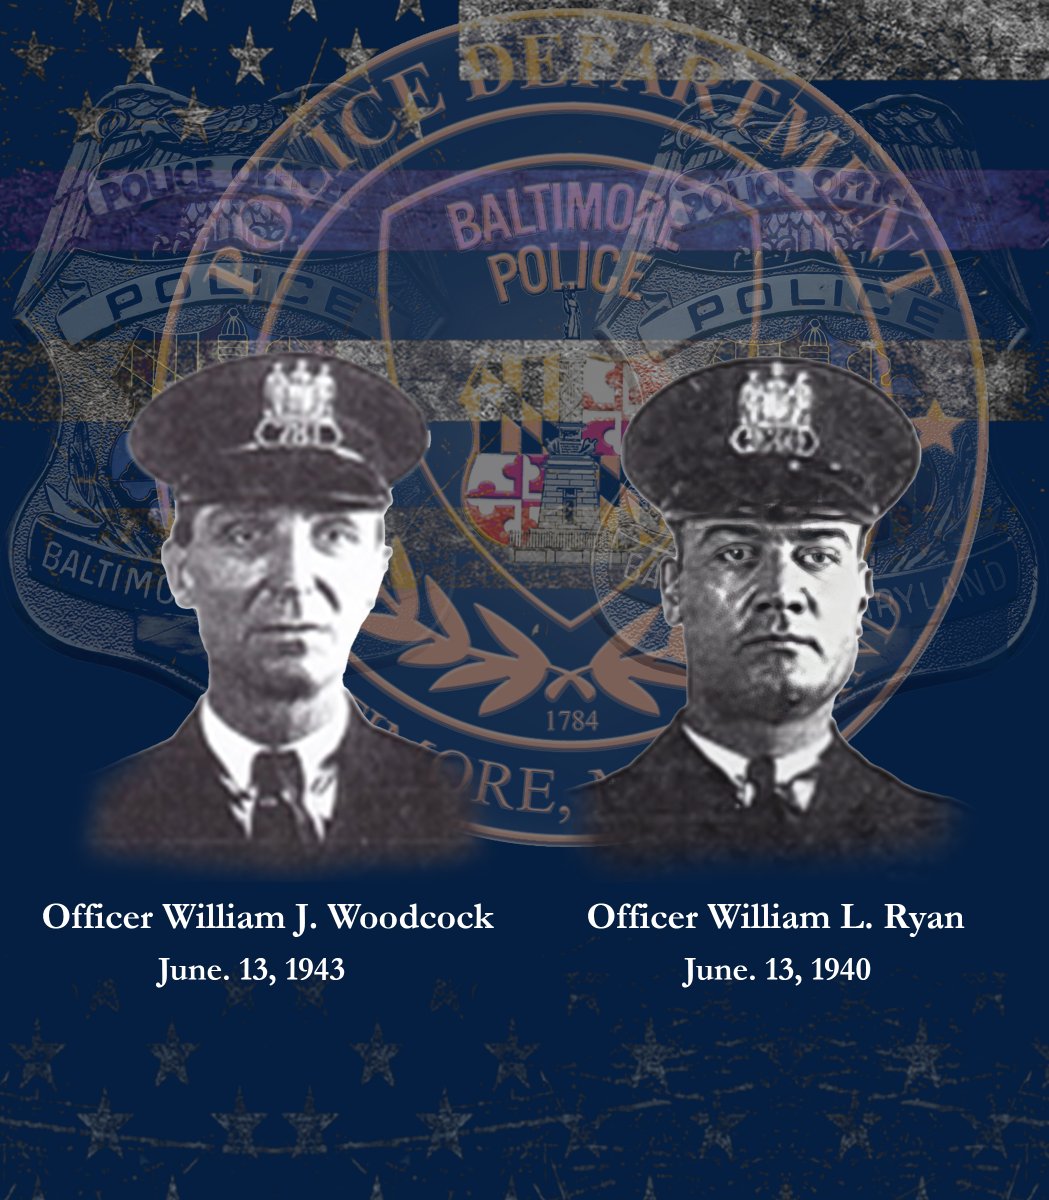 Officer William Woodcock was beaten to death on June 13, 1943, while questioning a male suspect on the 400 block of E Eager St. The suspect was arrested, tried for murder and acquitted. Officer Woodcock had served with the Baltimore Police Department for 20 years